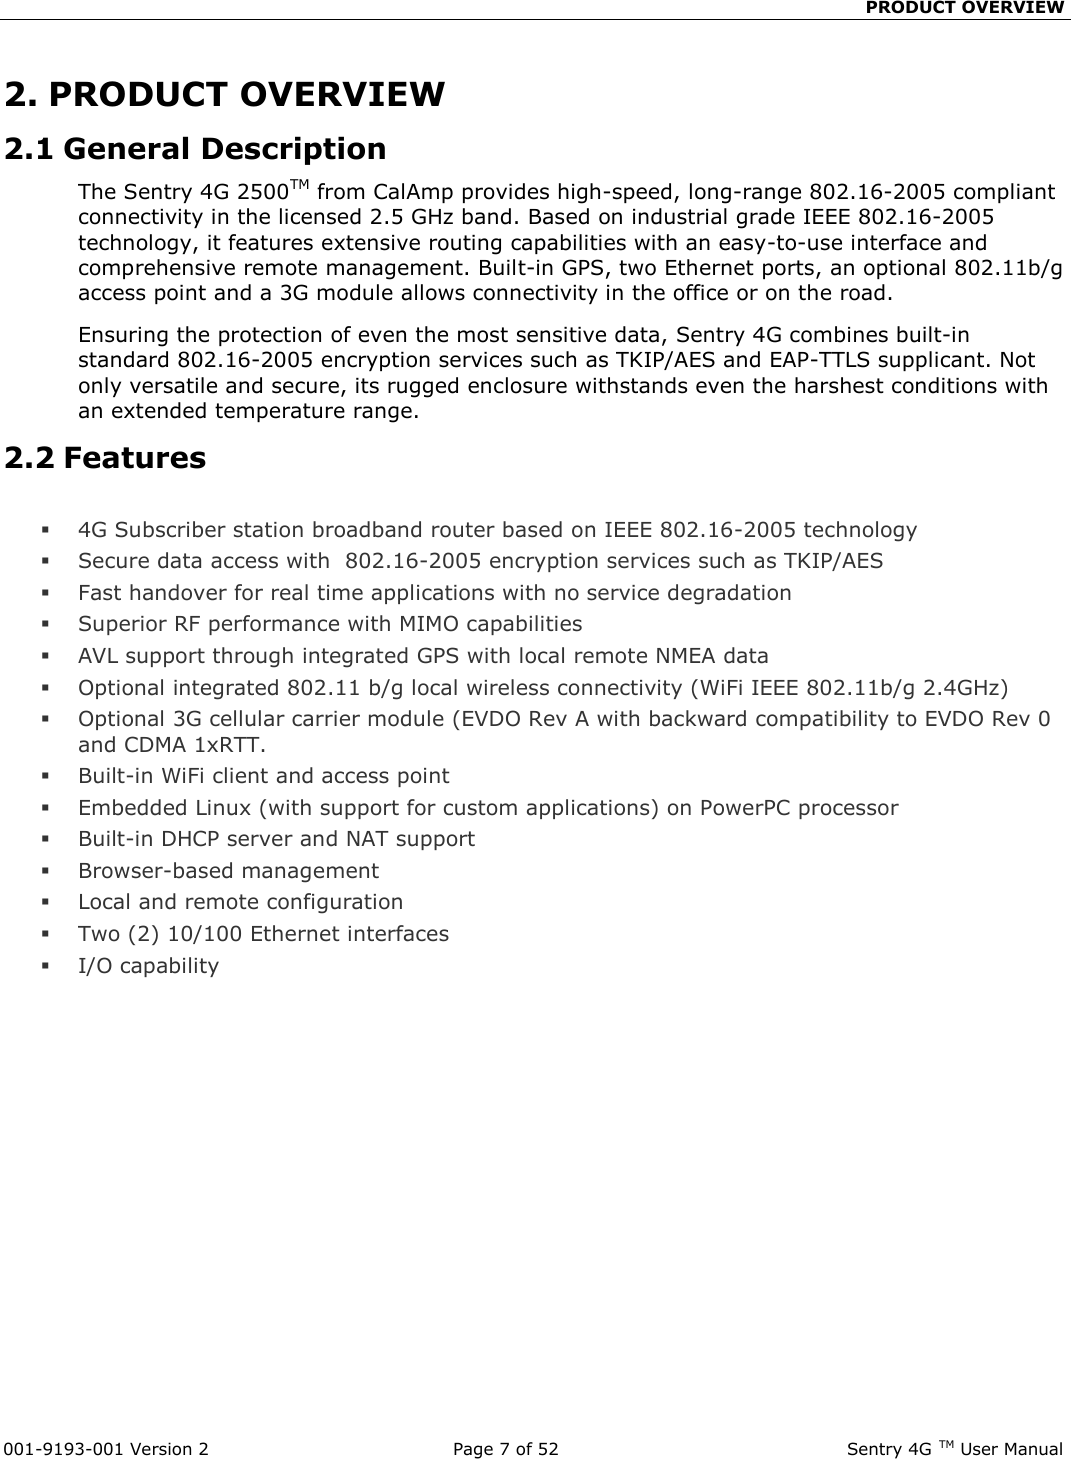                                                 PRODUCT OVERVIEW  001-9193-001 Version 2              Page 7 of 52                             Sentry 4G TM User Manual 2. PRODUCT OVERVIEW 2.1 General Description The Sentry 4G 2500TM from CalAmp provides high-speed, long-range 802.16-2005 compliant connectivity in the licensed 2.5 GHz band. Based on industrial grade IEEE 802.16-2005 technology, it features extensive routing capabilities with an easy-to-use interface and comprehensive remote management. Built-in GPS, two Ethernet ports, an optional 802.11b/g access point and a 3G module allows connectivity in the office or on the road. Ensuring the protection of even the most sensitive data, Sentry 4G combines built-in standard 802.16-2005 encryption services such as TKIP/AES and EAP-TTLS supplicant. Not only versatile and secure, its rugged enclosure withstands even the harshest conditions with an extended temperature range.  2.2 Features   4G Subscriber station broadband router based on IEEE 802.16-2005 technology  Secure data access with  802.16-2005 encryption services such as TKIP/AES  Fast handover for real time applications with no service degradation  Superior RF performance with MIMO capabilities  AVL support through integrated GPS with local remote NMEA data  Optional integrated 802.11 b/g local wireless connectivity (WiFi IEEE 802.11b/g 2.4GHz)   Optional 3G cellular carrier module (EVDO Rev A with backward compatibility to EVDO Rev 0 and CDMA 1xRTT.  Built-in WiFi client and access point  Embedded Linux (with support for custom applications) on PowerPC processor  Built-in DHCP server and NAT support   Browser-based management   Local and remote configuration  Two (2) 10/100 Ethernet interfaces  I/O capability  